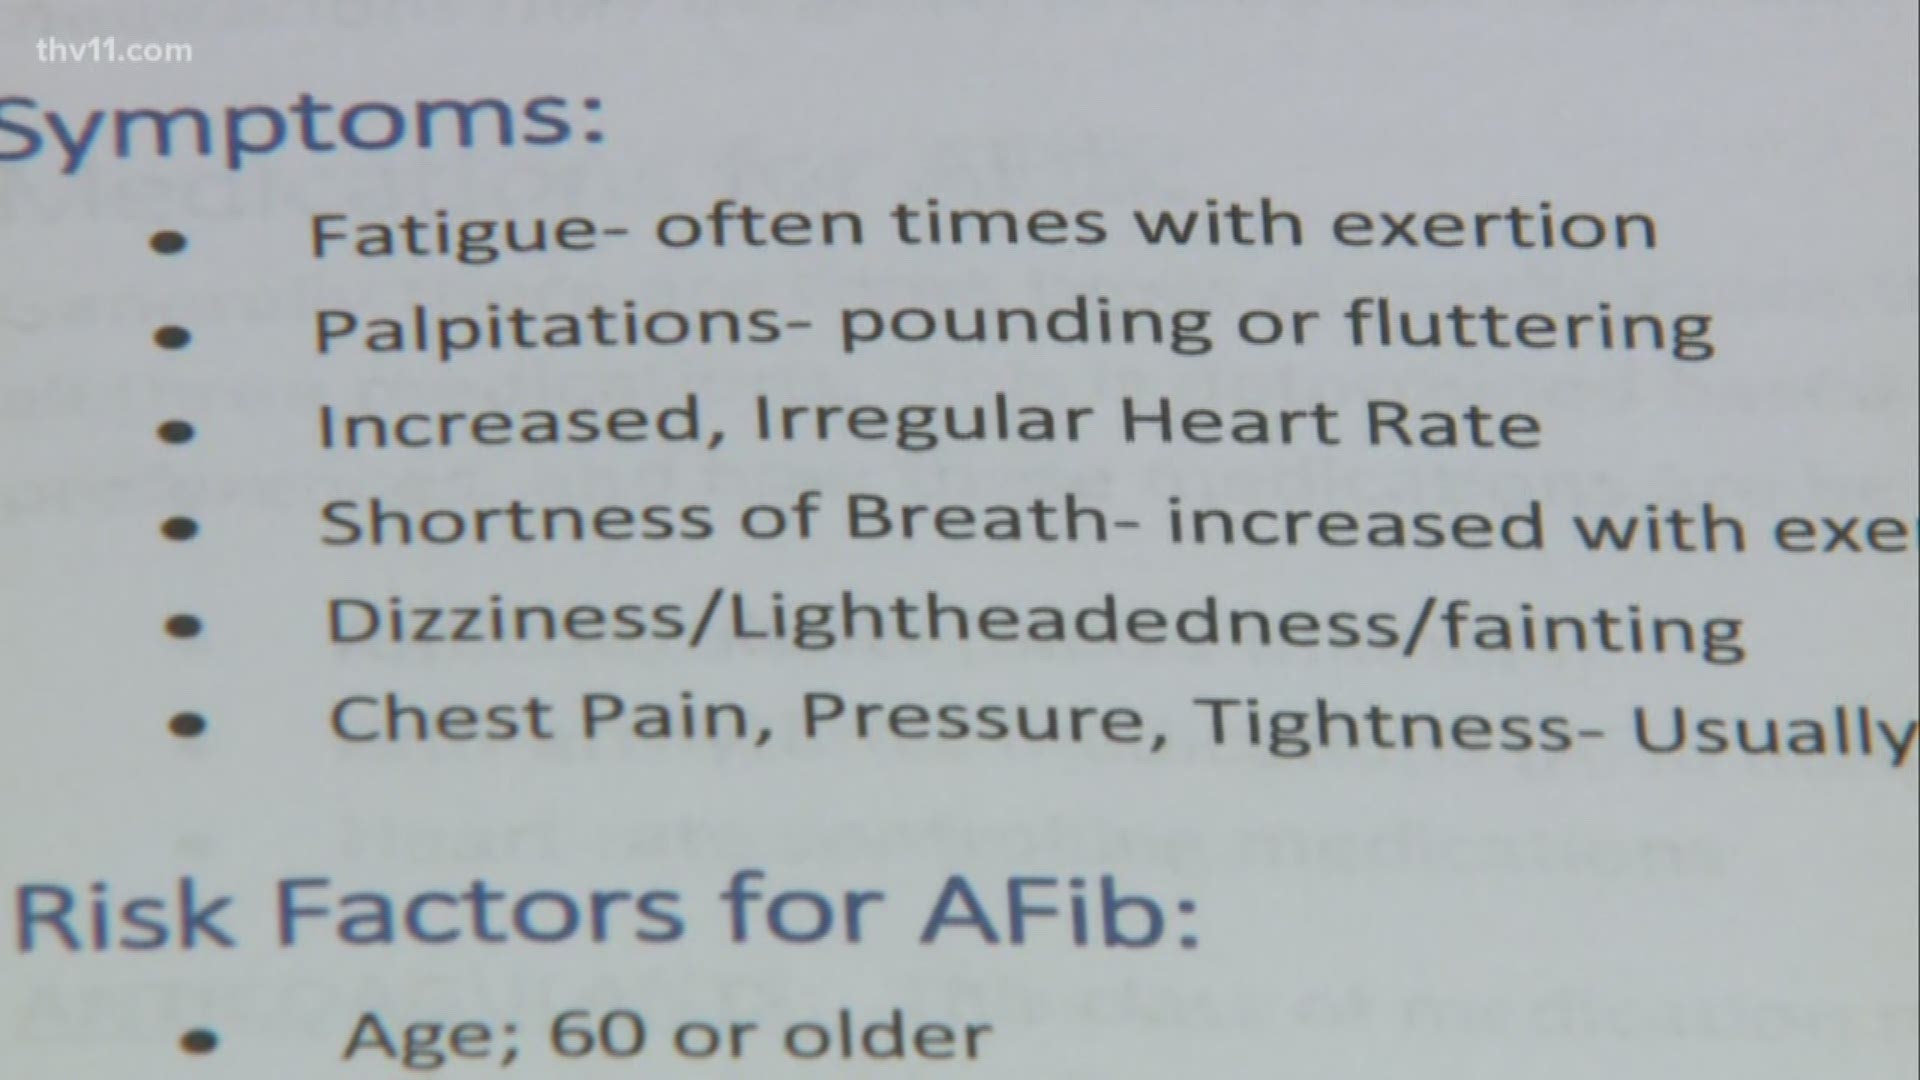 AFib is a disease that benefits immensely from early detection.